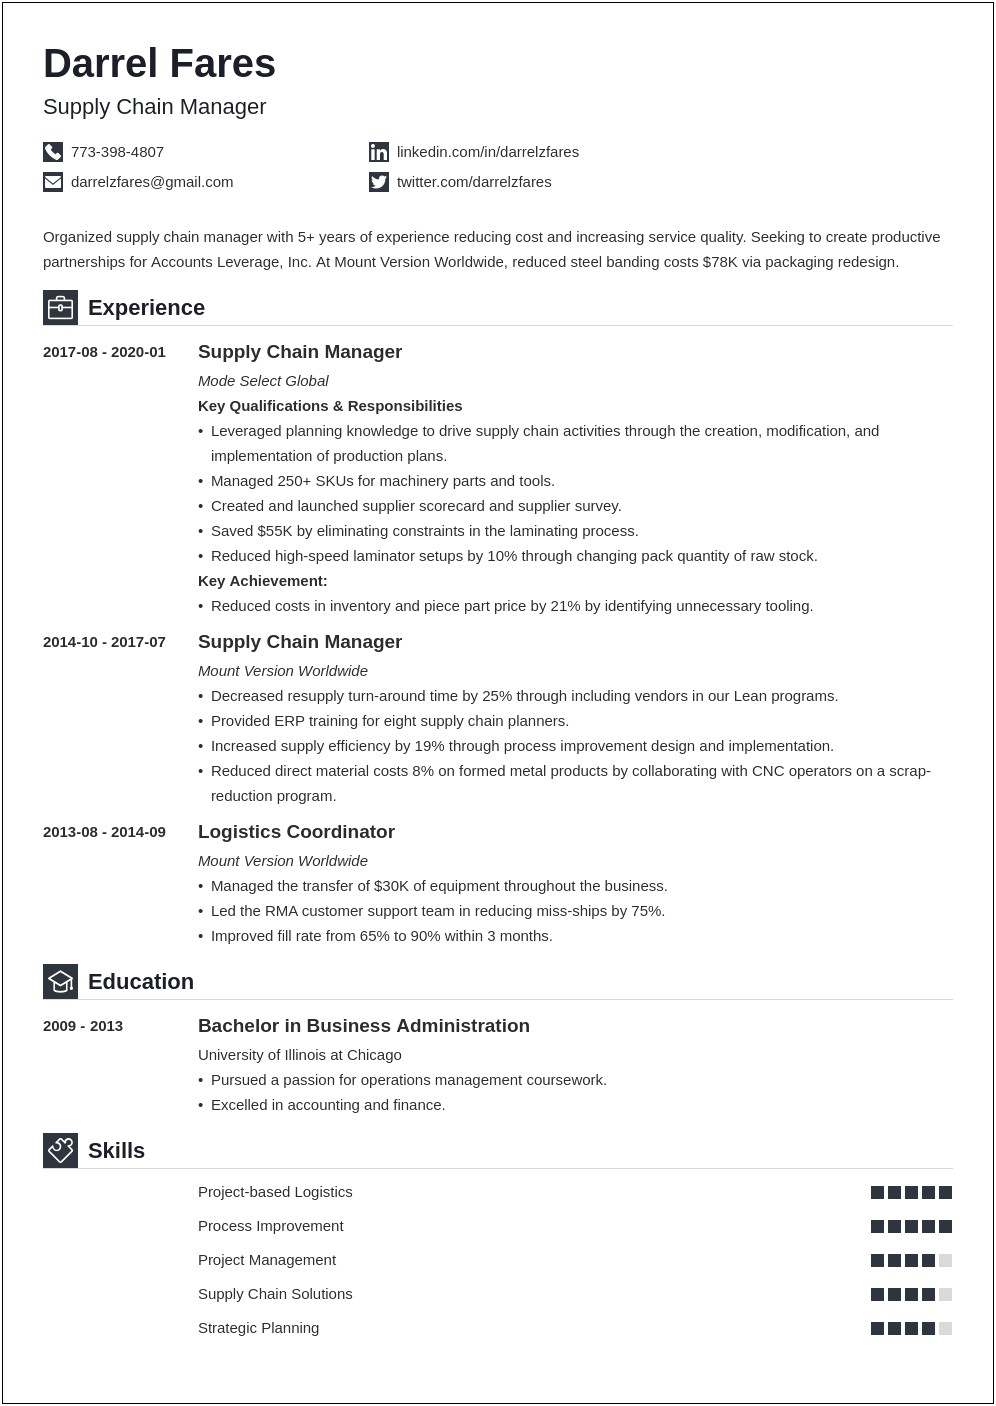 Resume Format For Logistics Manager In India